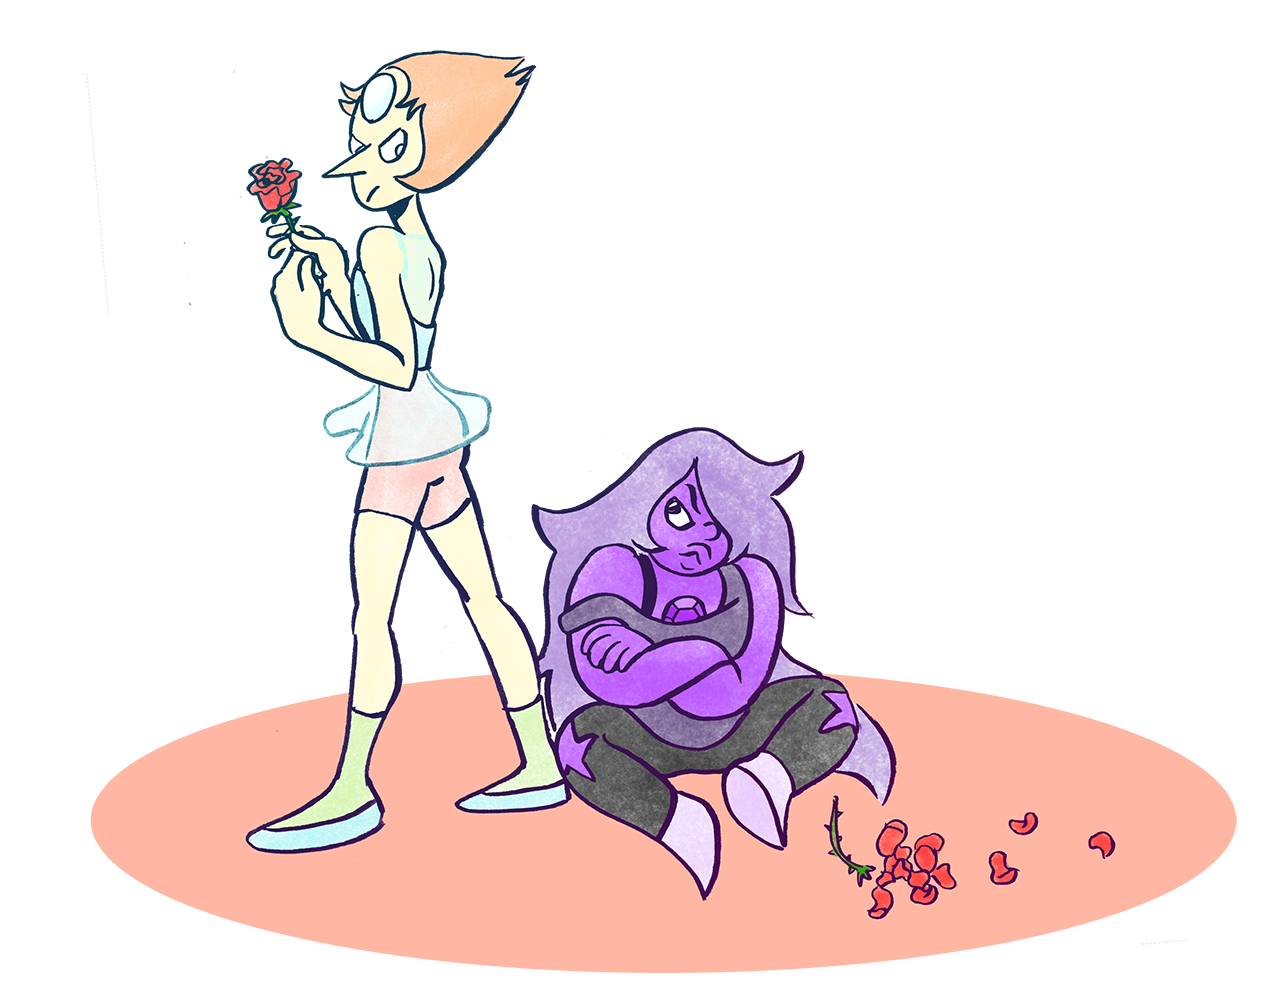 I’ve been rewatching season 1, and I LOVE Pearl and Amethyst’s rivalry.